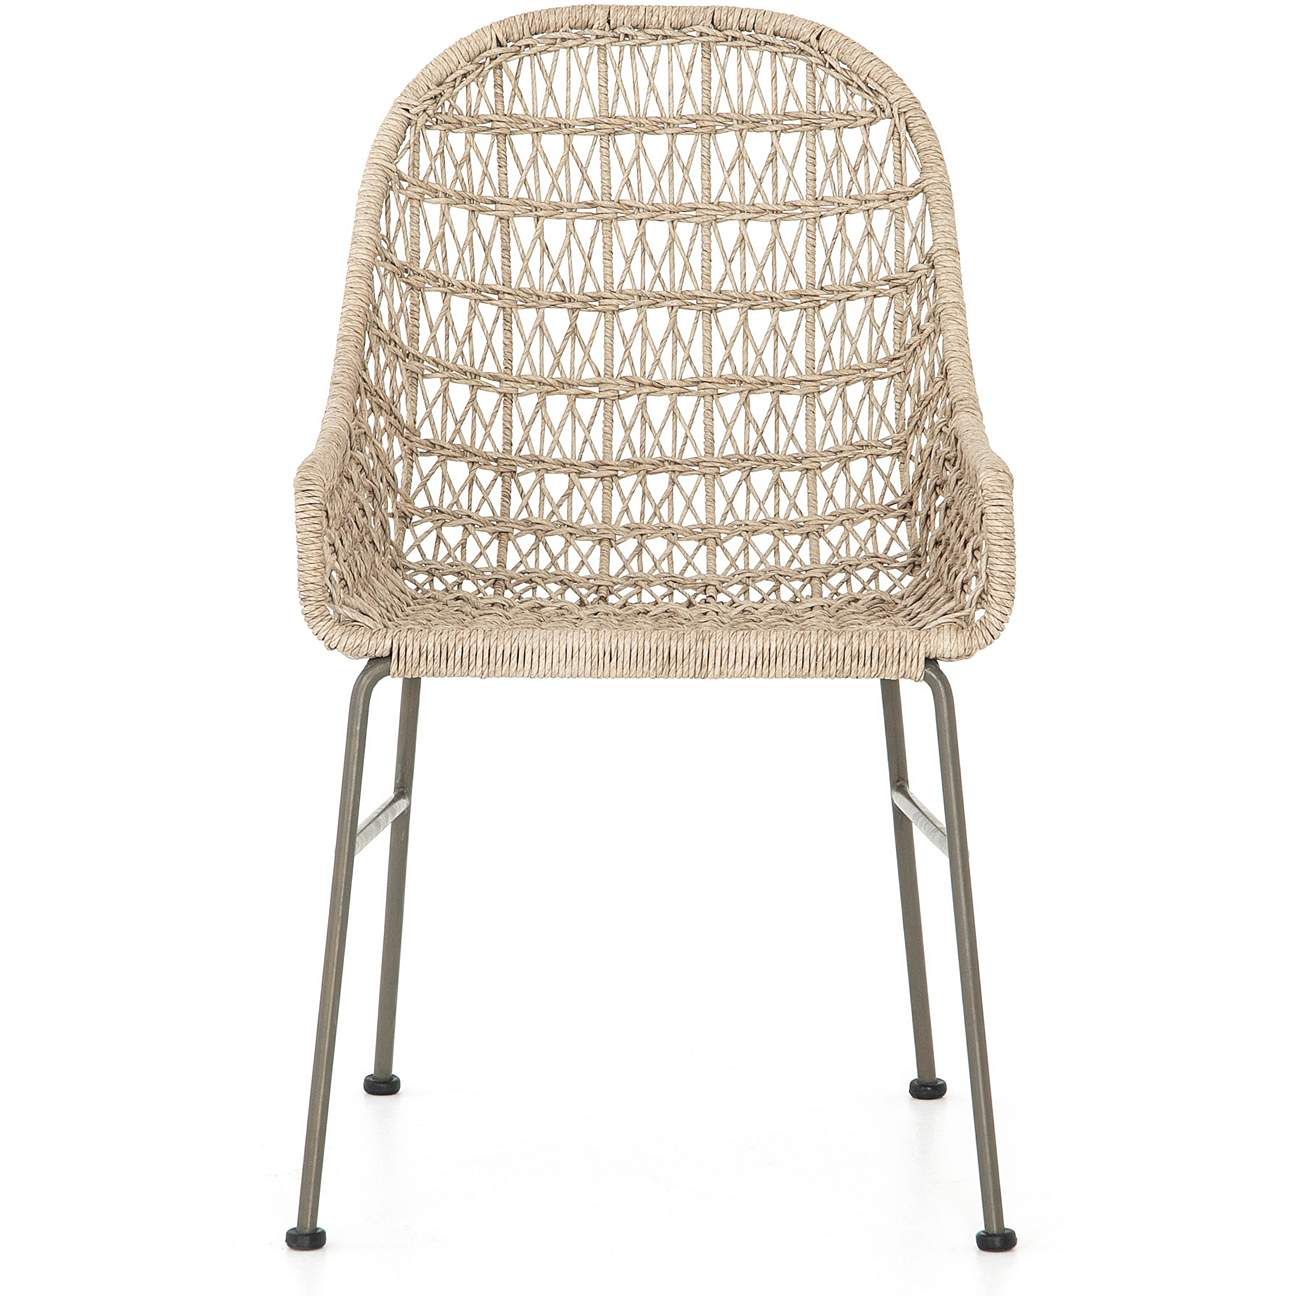 Bandera Vintage White Woven Outdoor Dining Chair | Lamps Plus